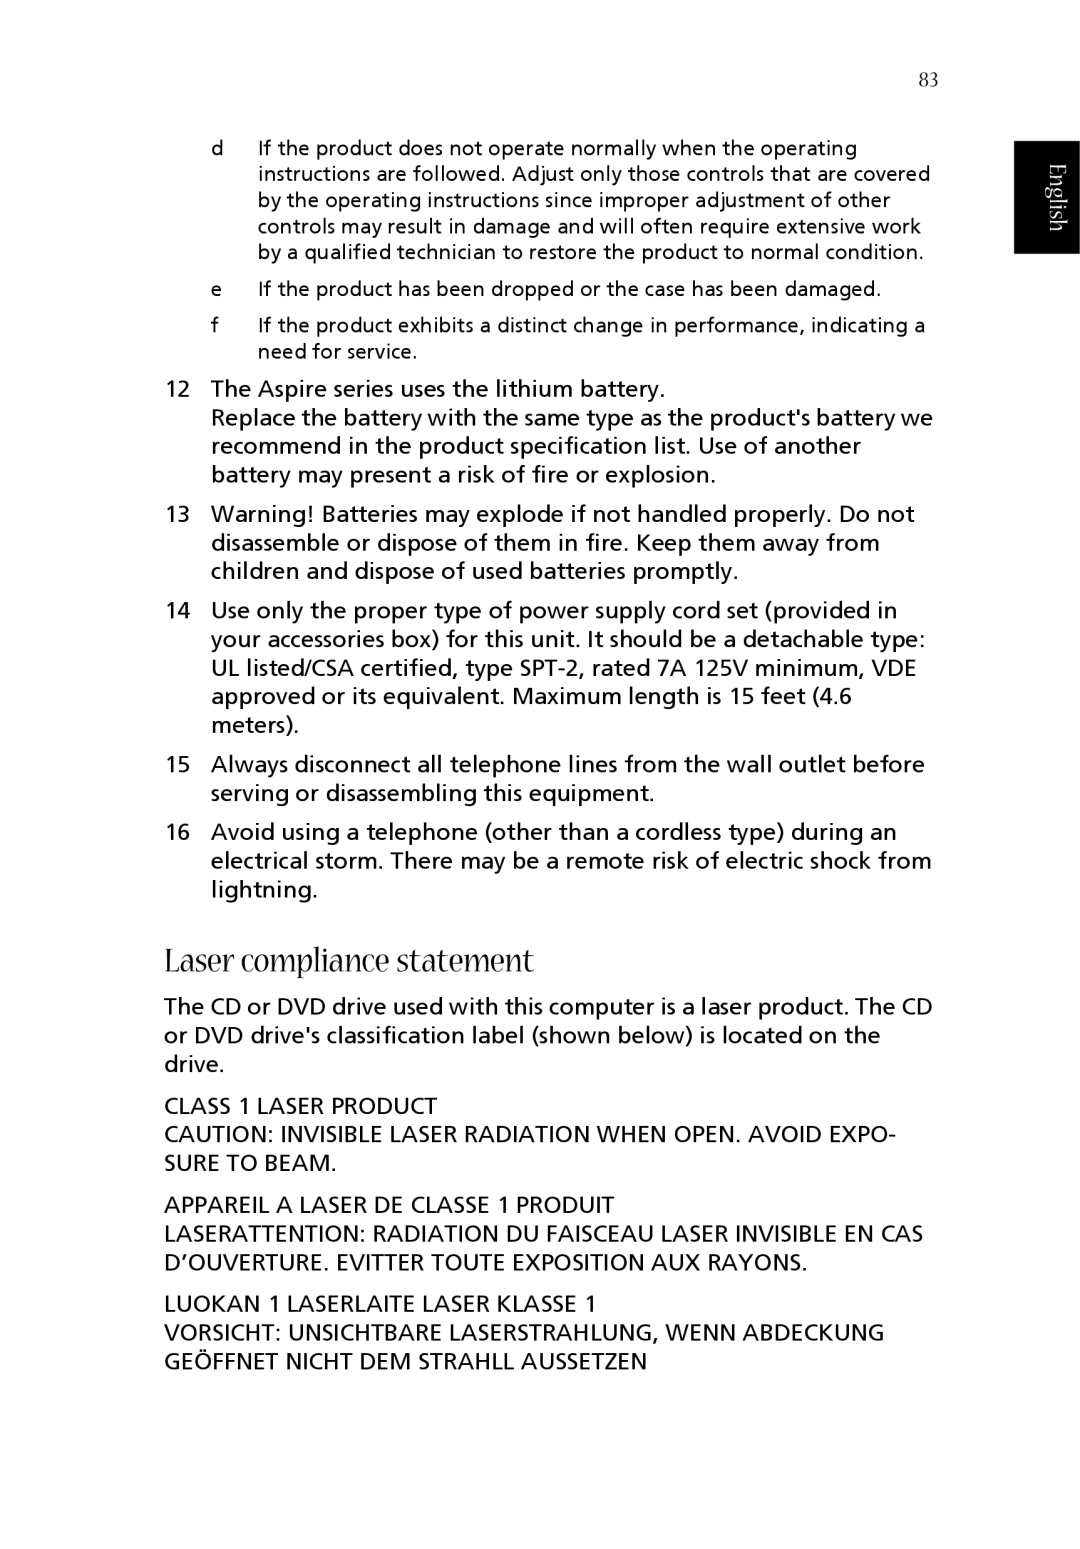 Acer 1360 manual Laser compliance statement, English 